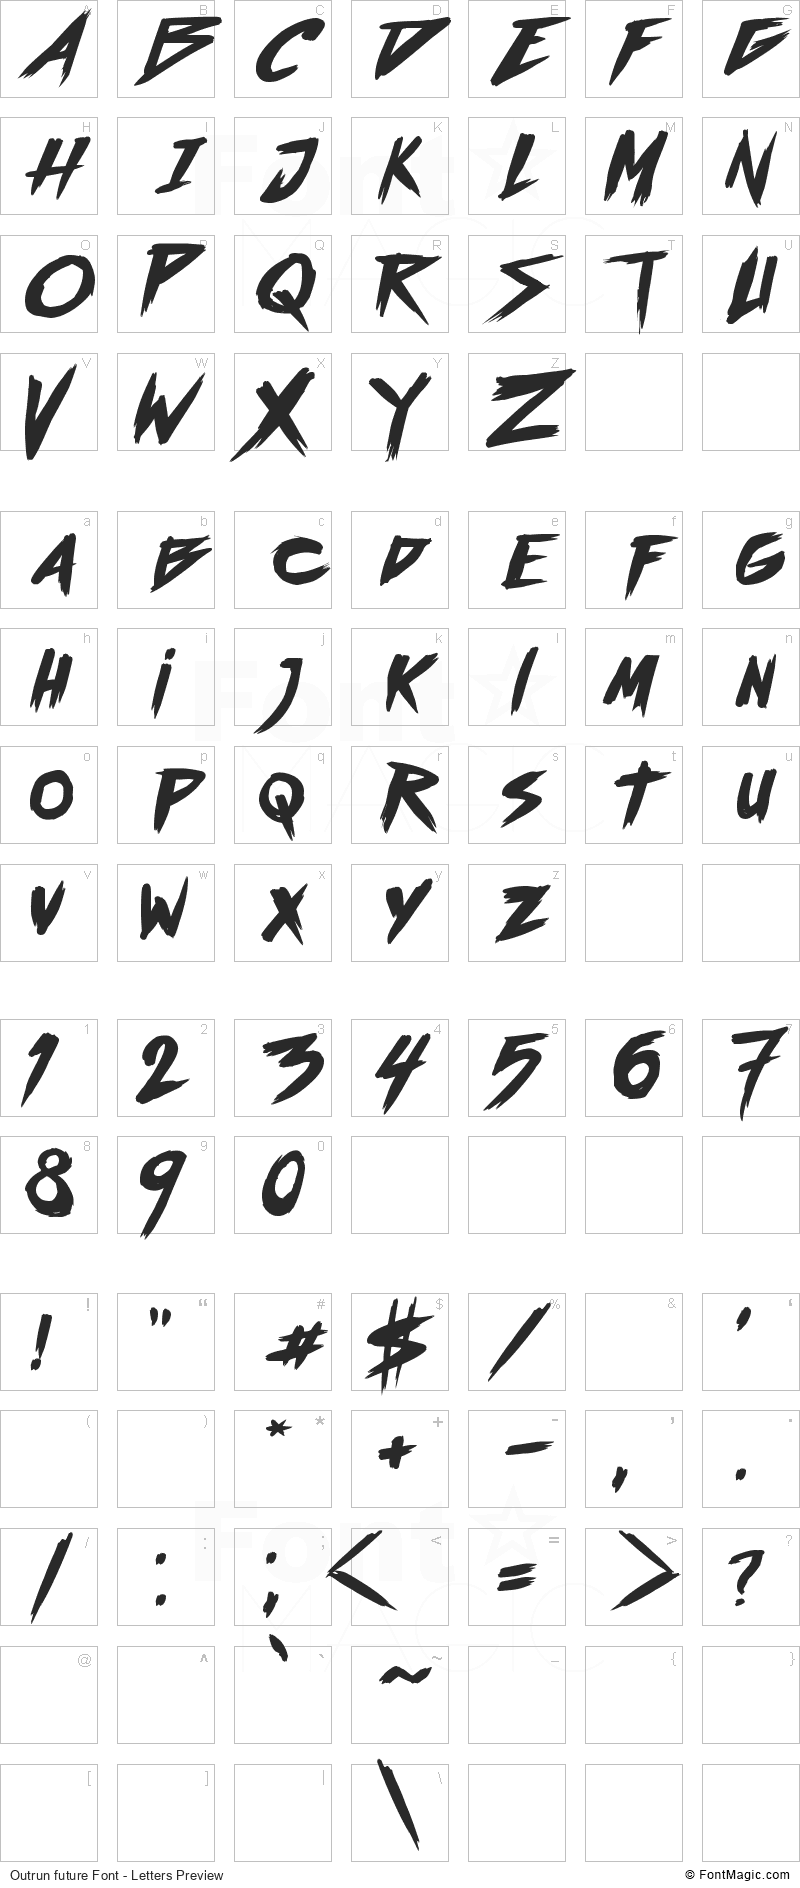 Outrun future Font - All Latters Preview Chart